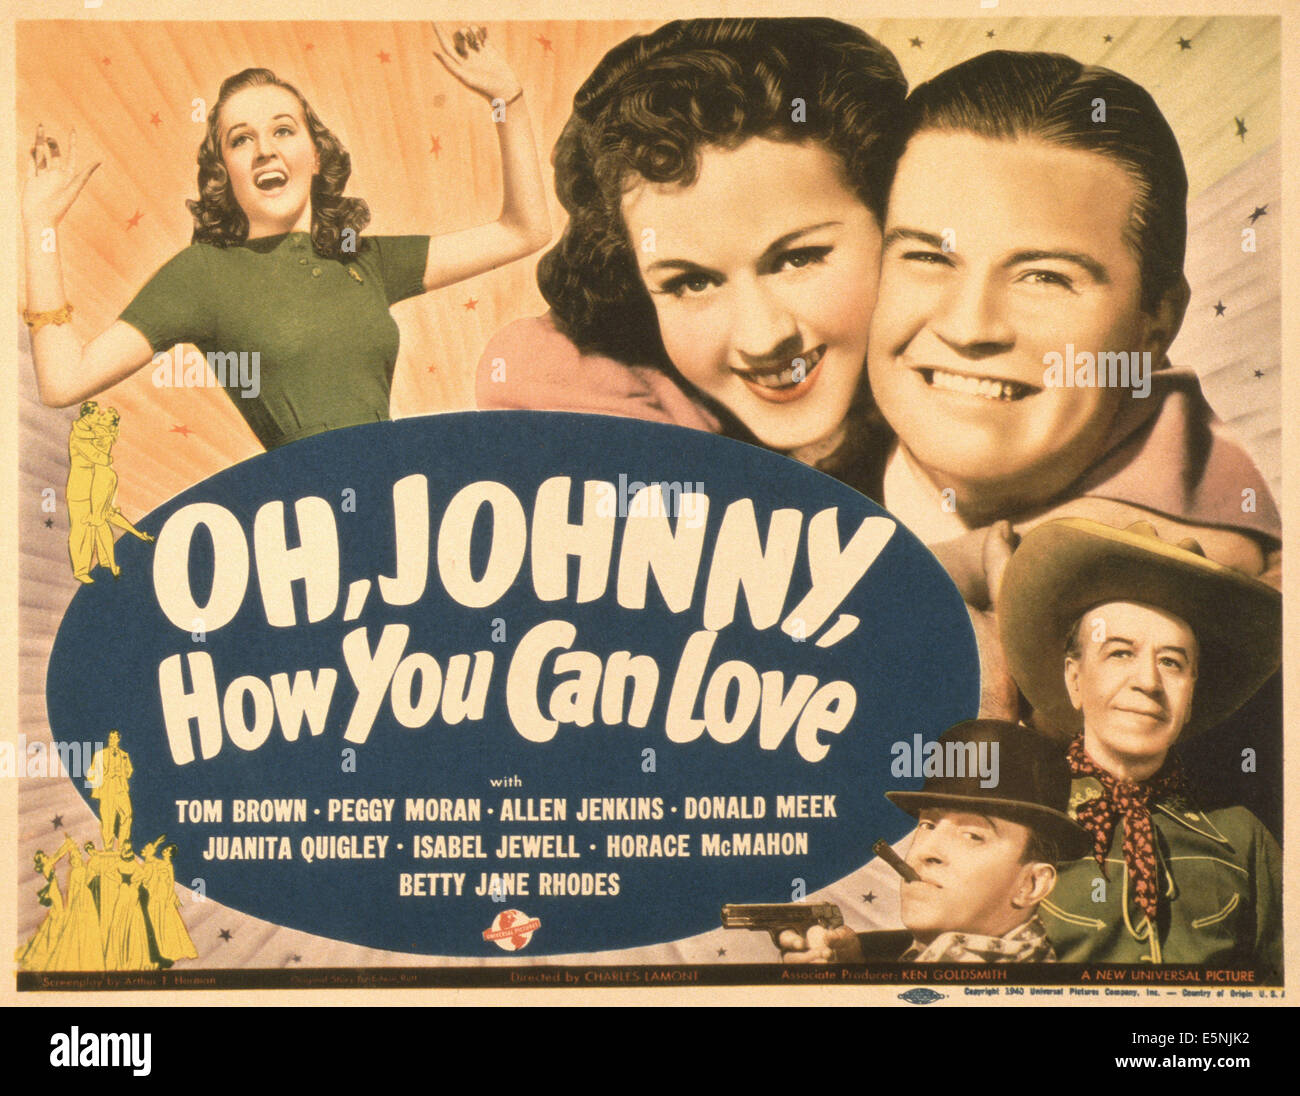 OH JOHNNY, HOW YOU CAN LOVE, US poster, from left: Betty Jane Rhodes, Peggy Moran, Tom Brown, Allen Jenkins (cigar), Donald Stock Photo